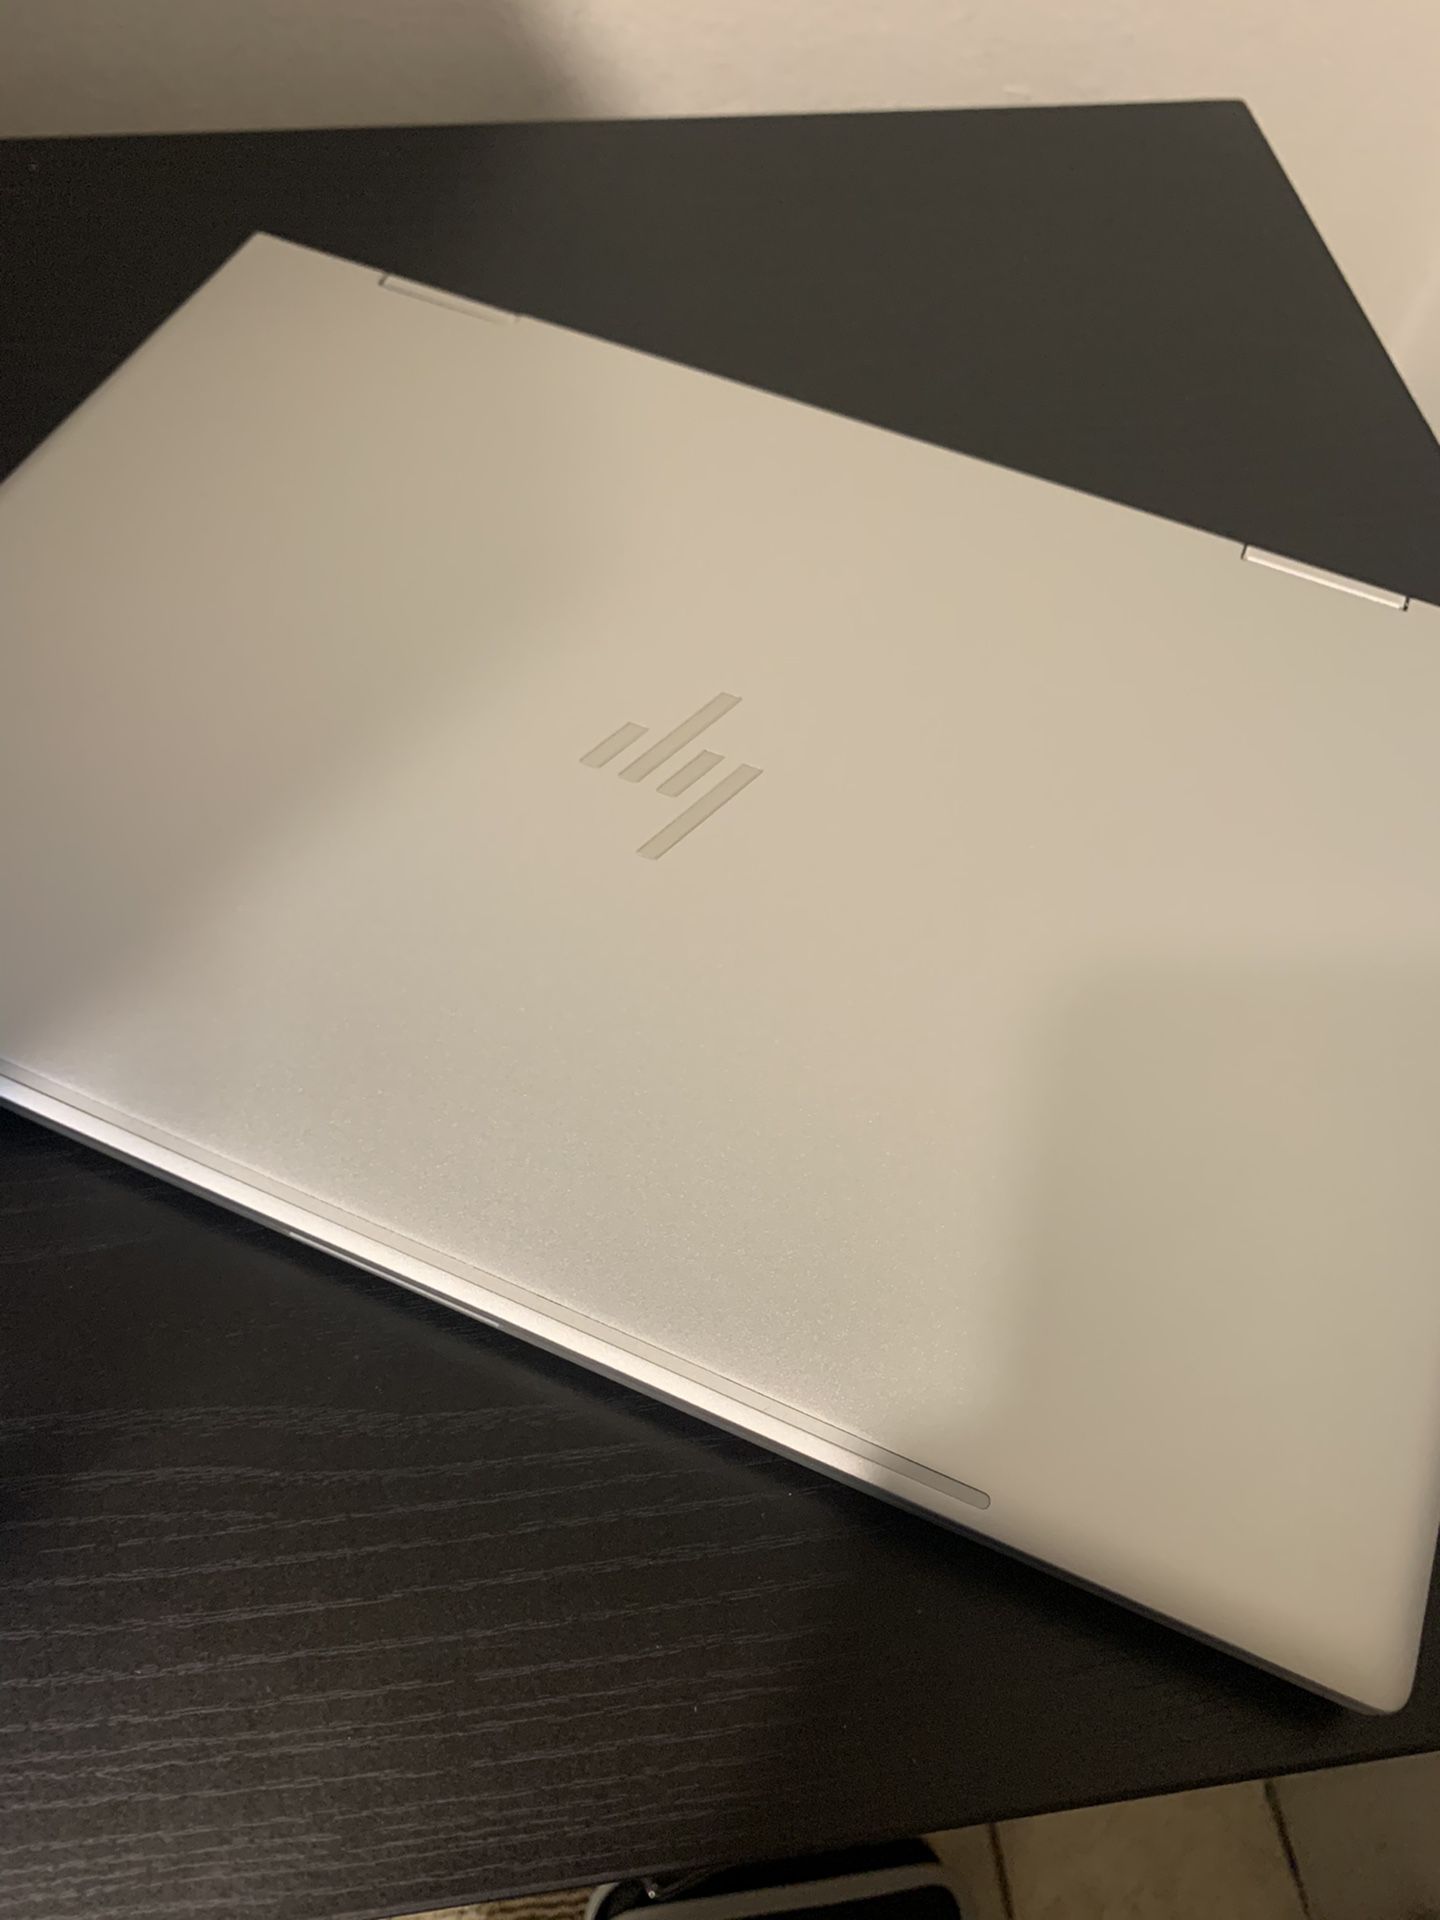 HP Envy x360 Convertible laptop 2 in 1